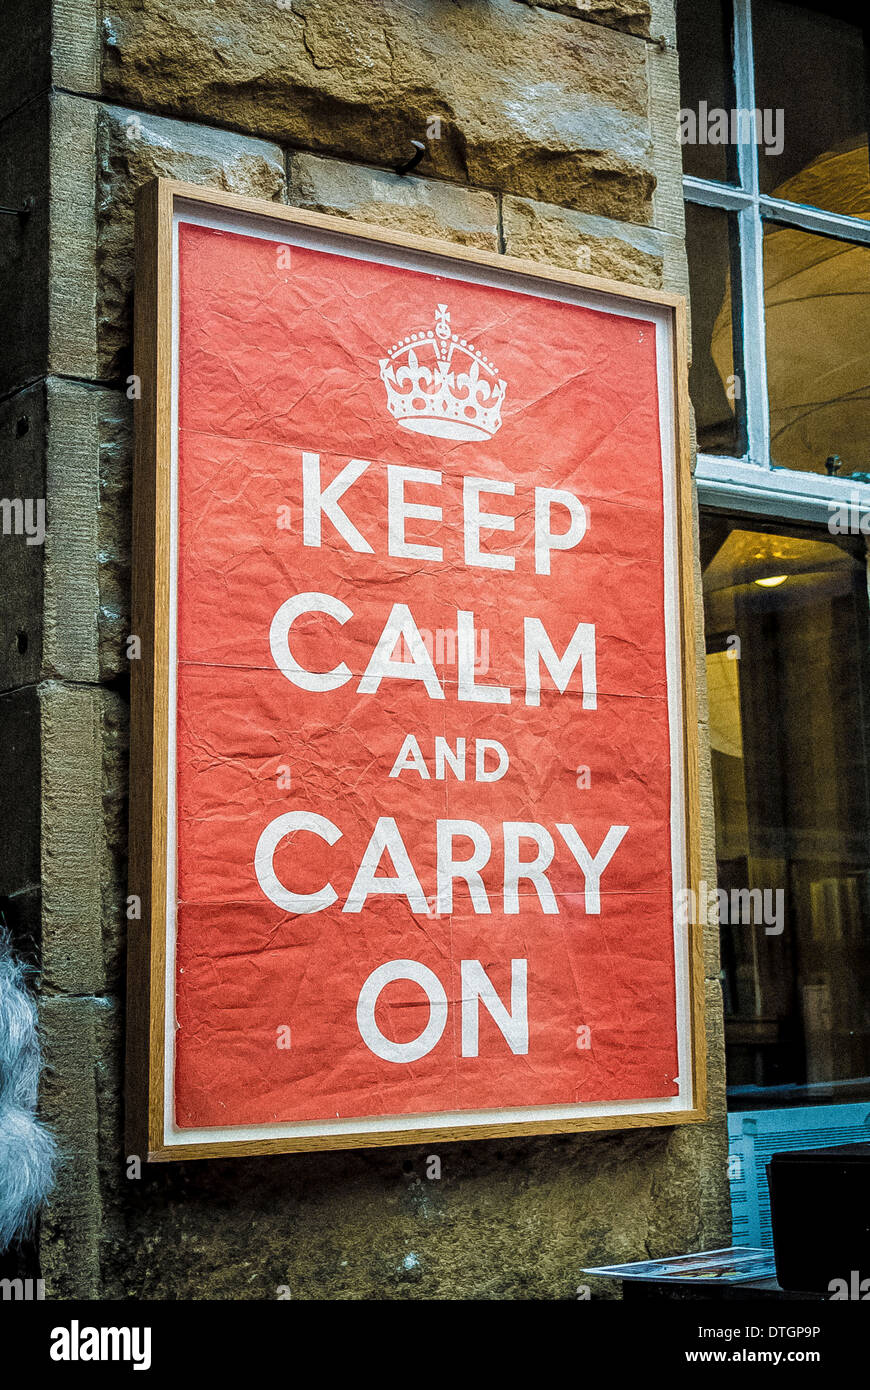 Original Print Of Keep Calm And Carry On Poster At Barter Books